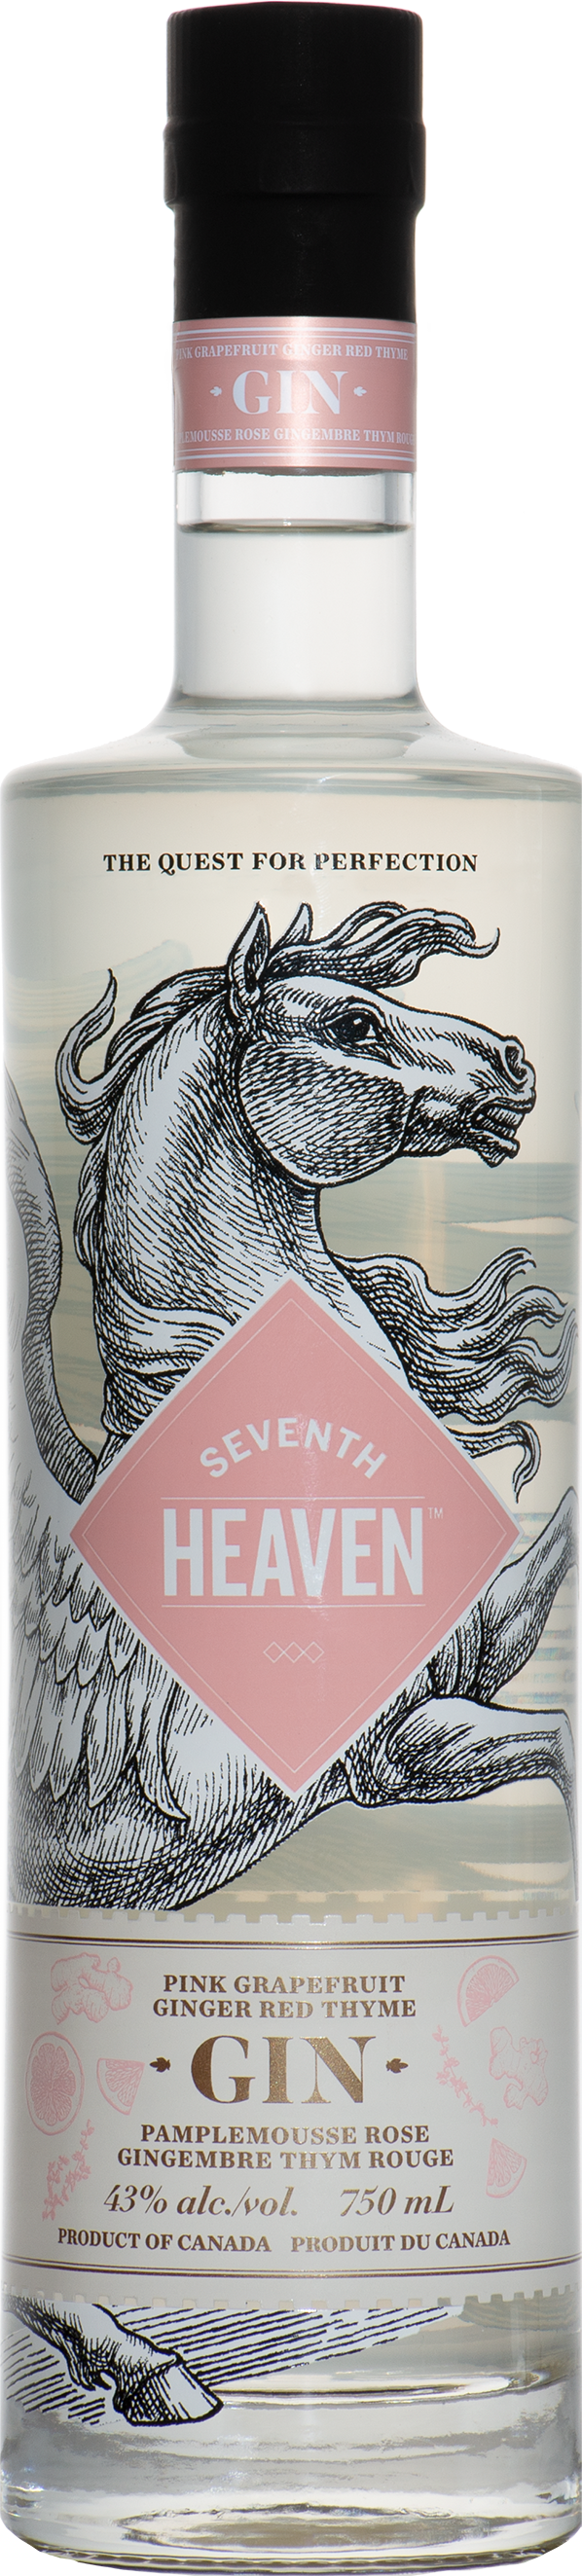 Seventh Heaven Pink Grapefruit, Ginger, and Red Thyme Gin